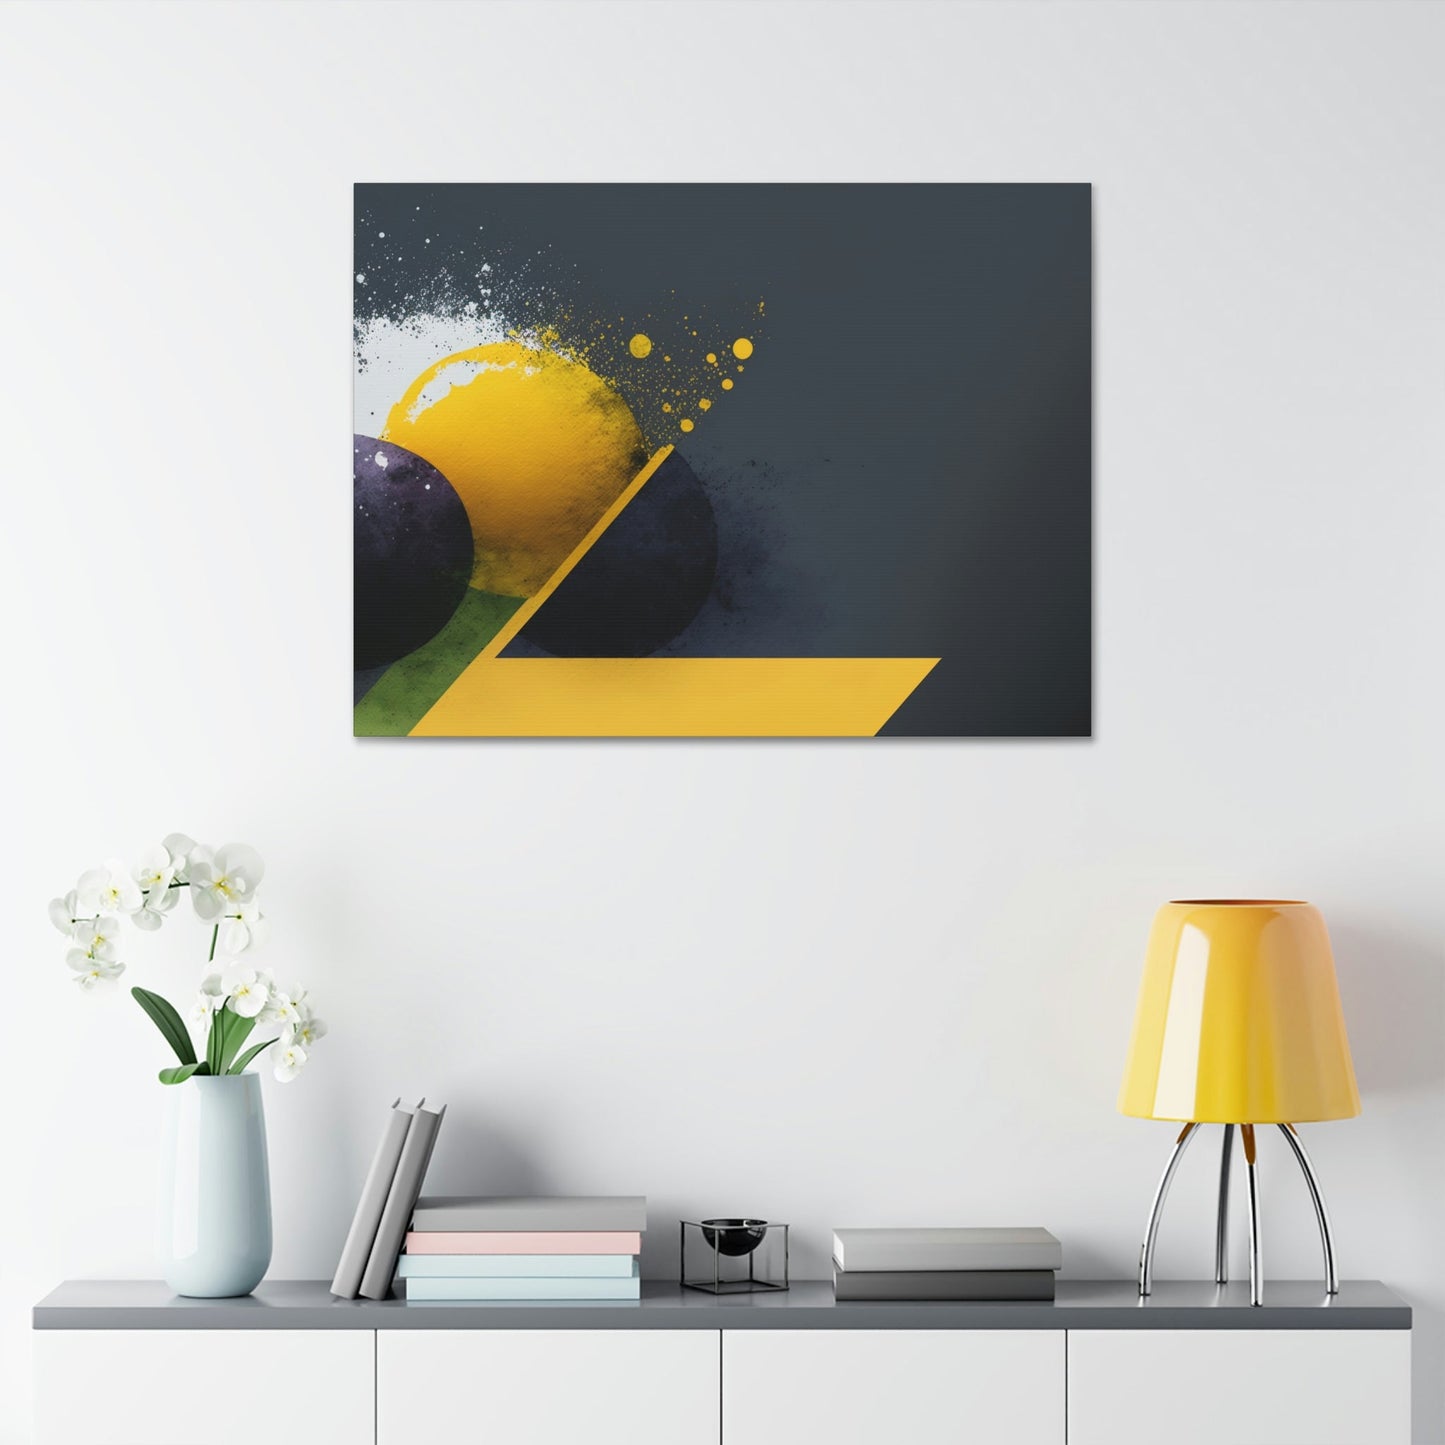 Minimalist Harmony: A Print on Canvas & Poster of an Abstract Composition